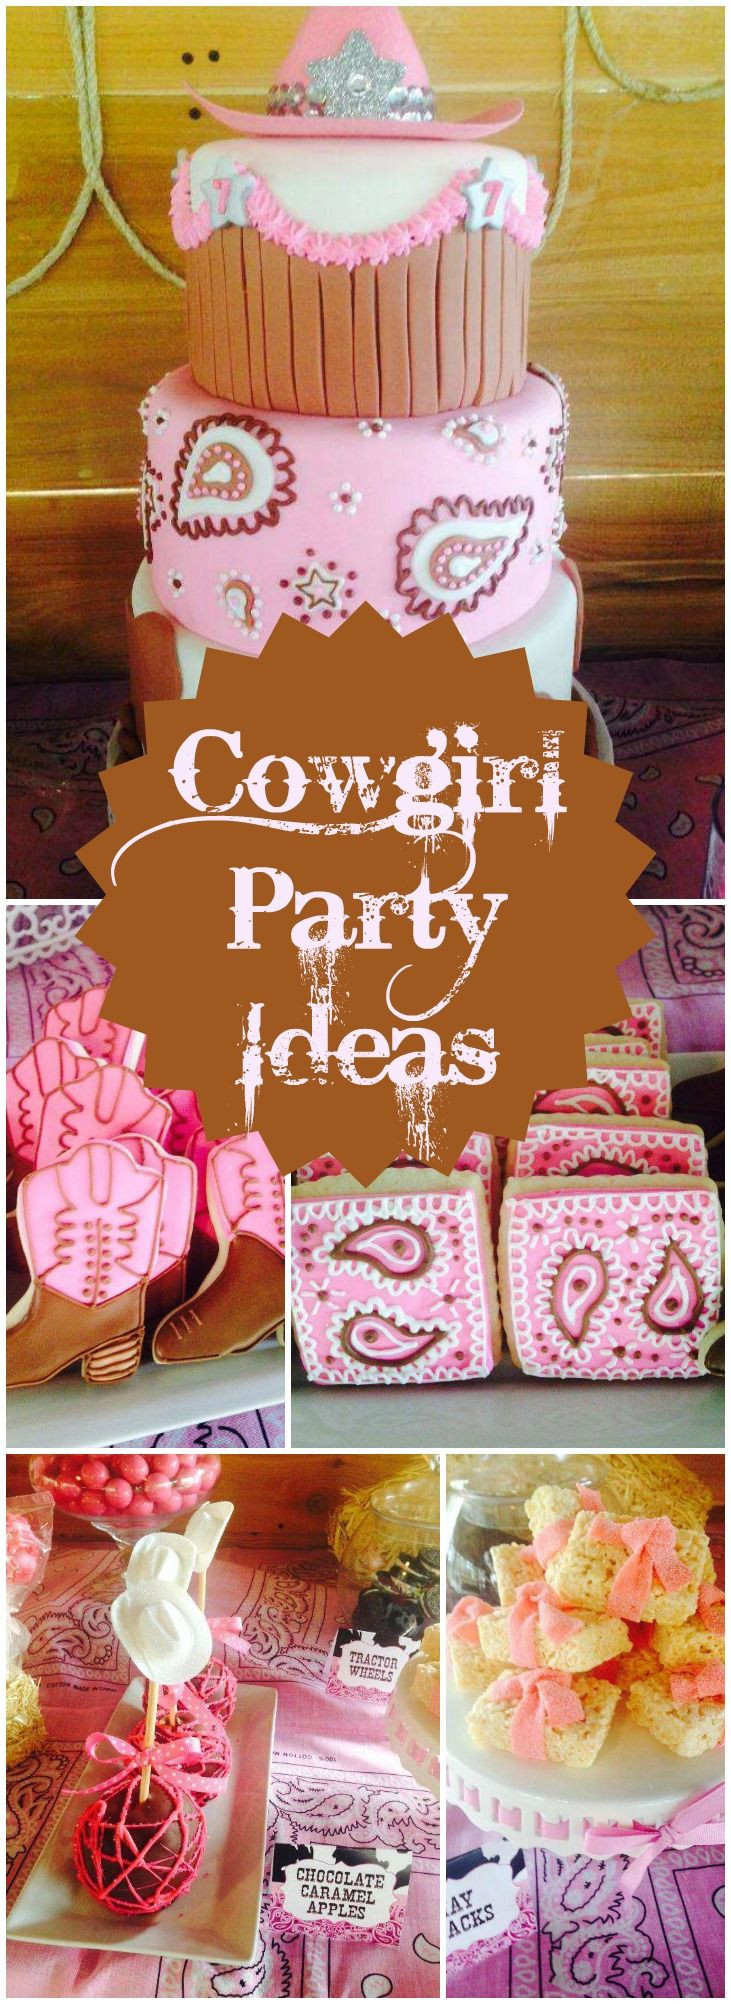 Cowgirl Decorations For Birthday Party
 418 best Cowgirl Party Ideas images on Pinterest